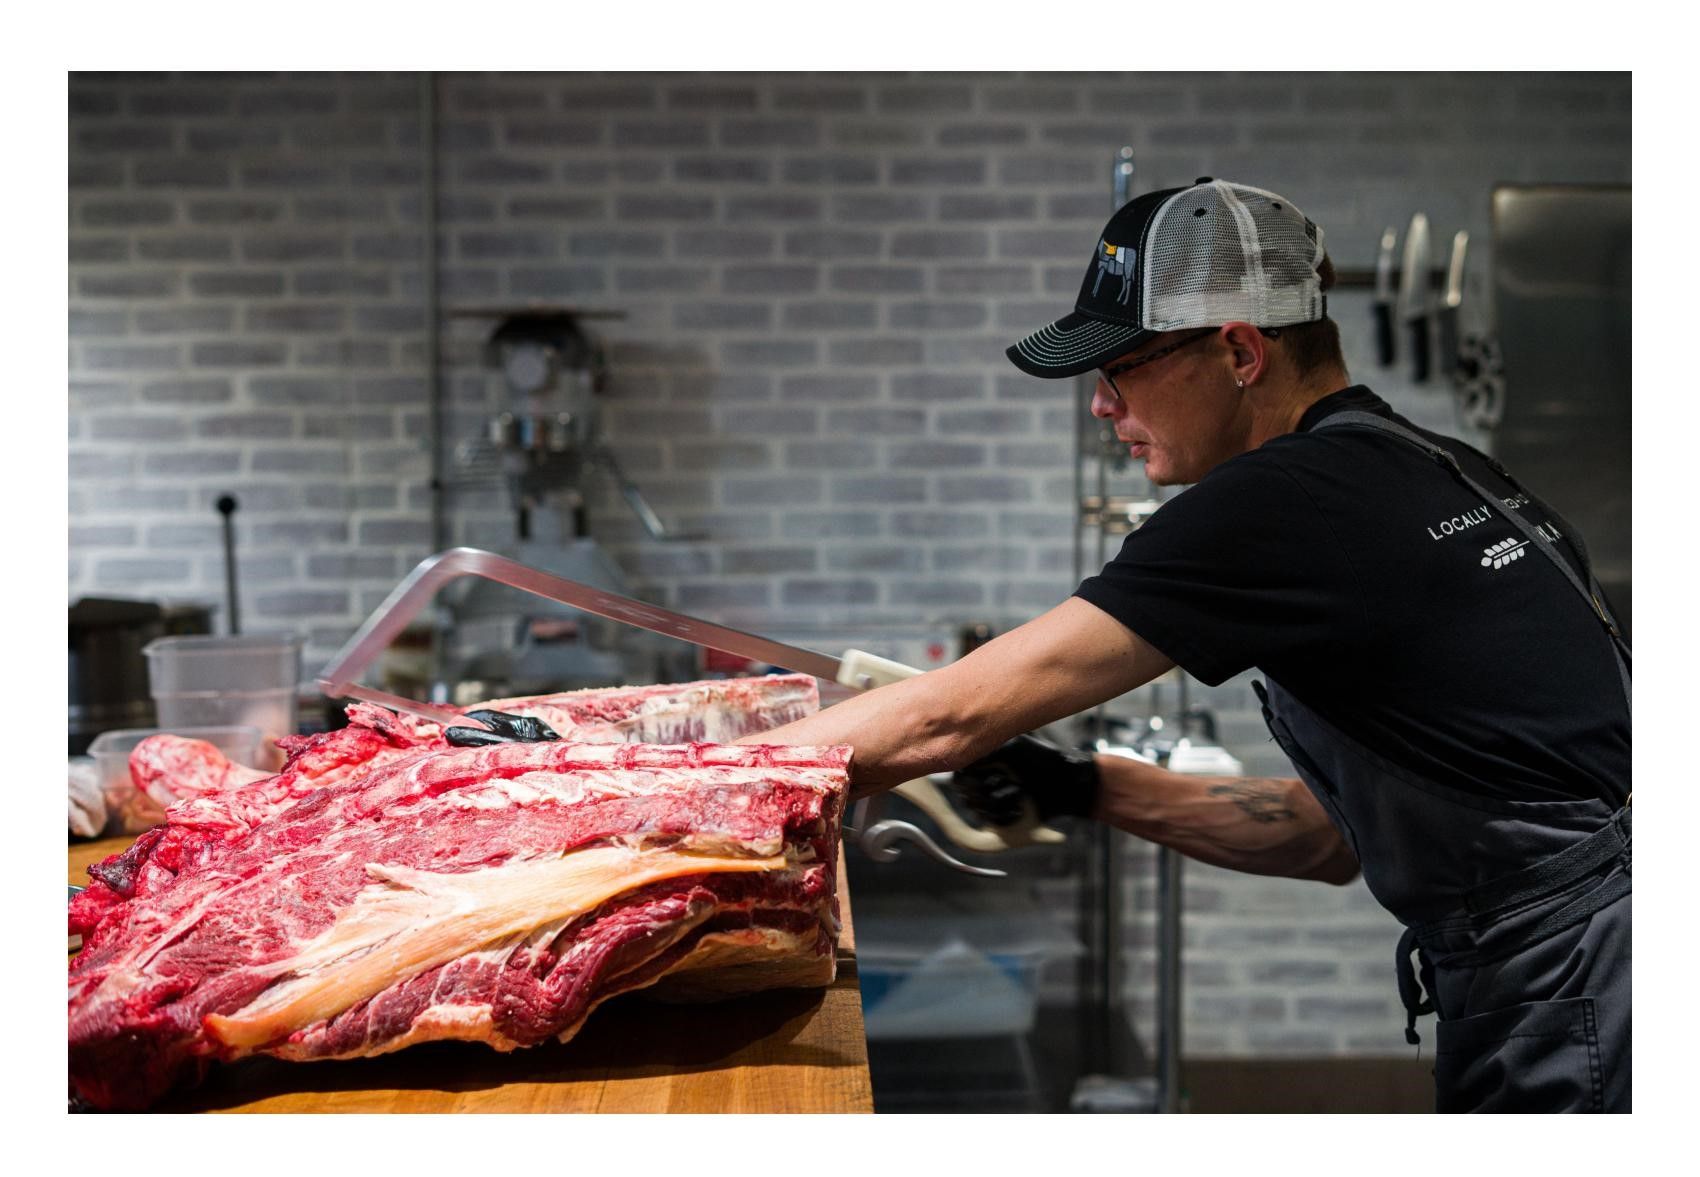 Responsibly Raised, Respectfully Butchered - The Meat Market